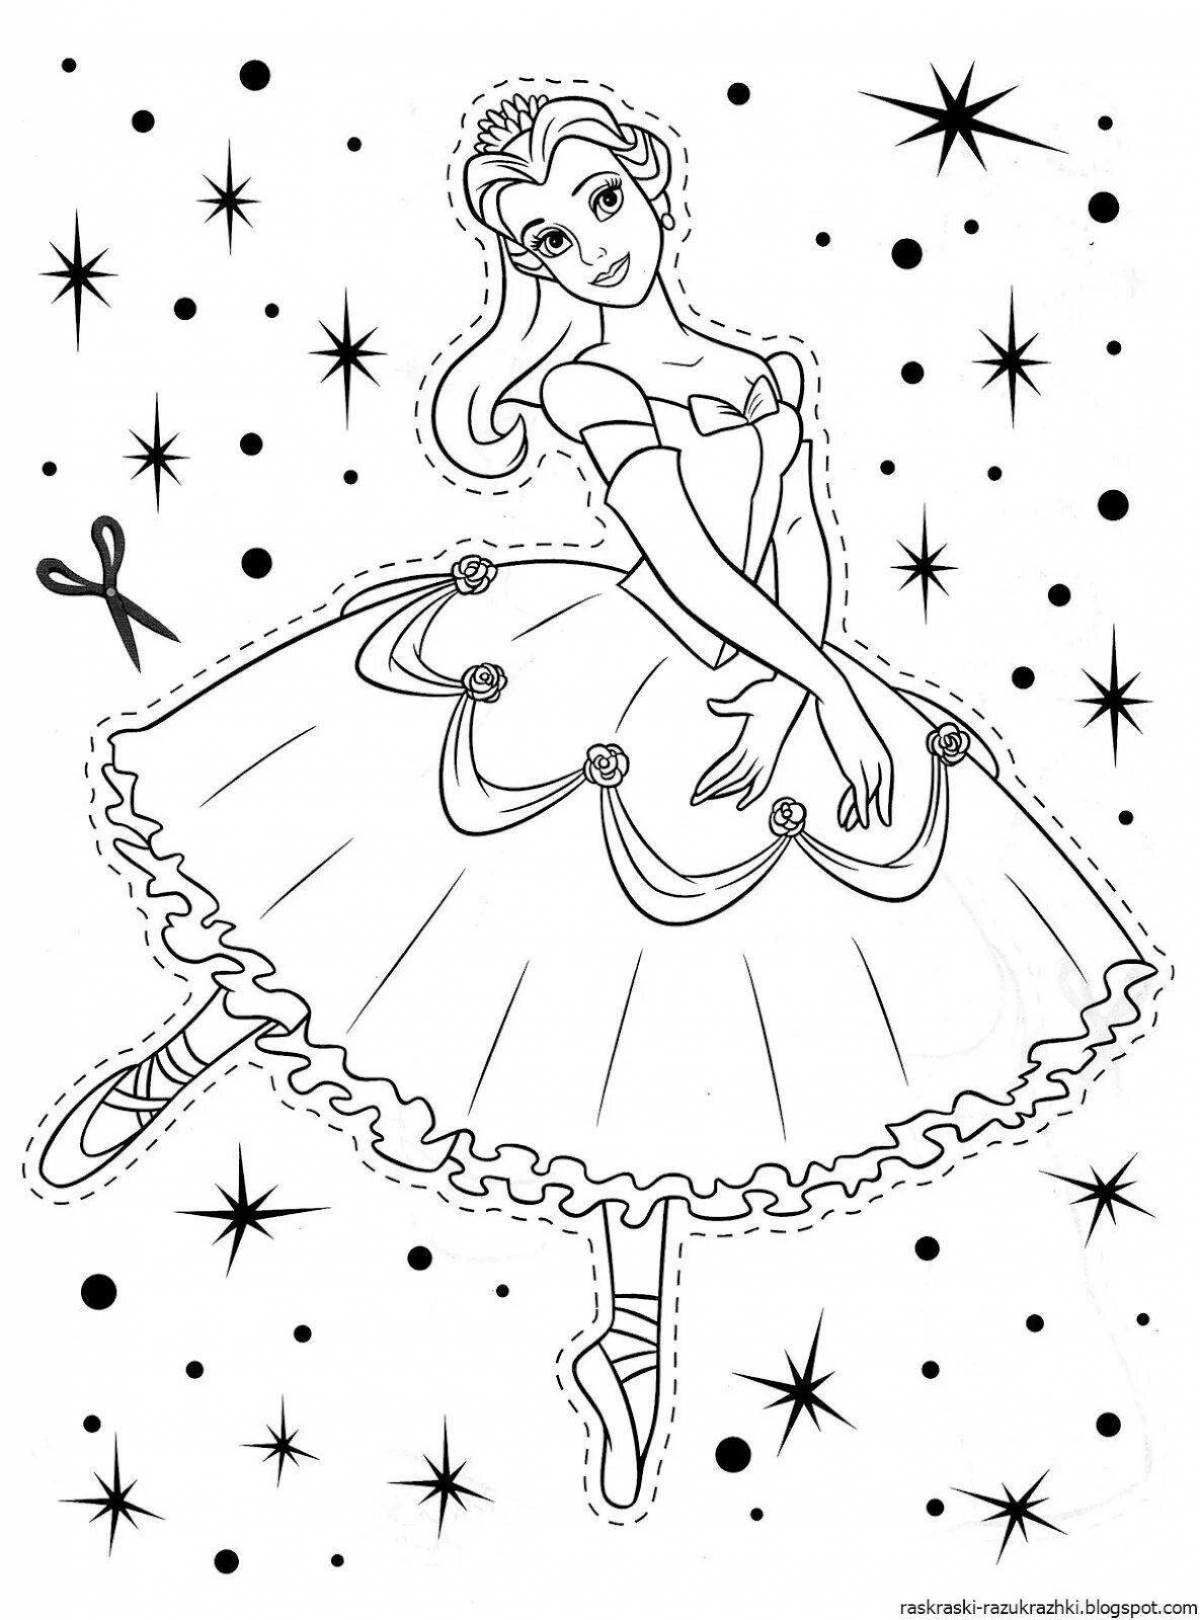 Exotic princess coloring 4-5 years old